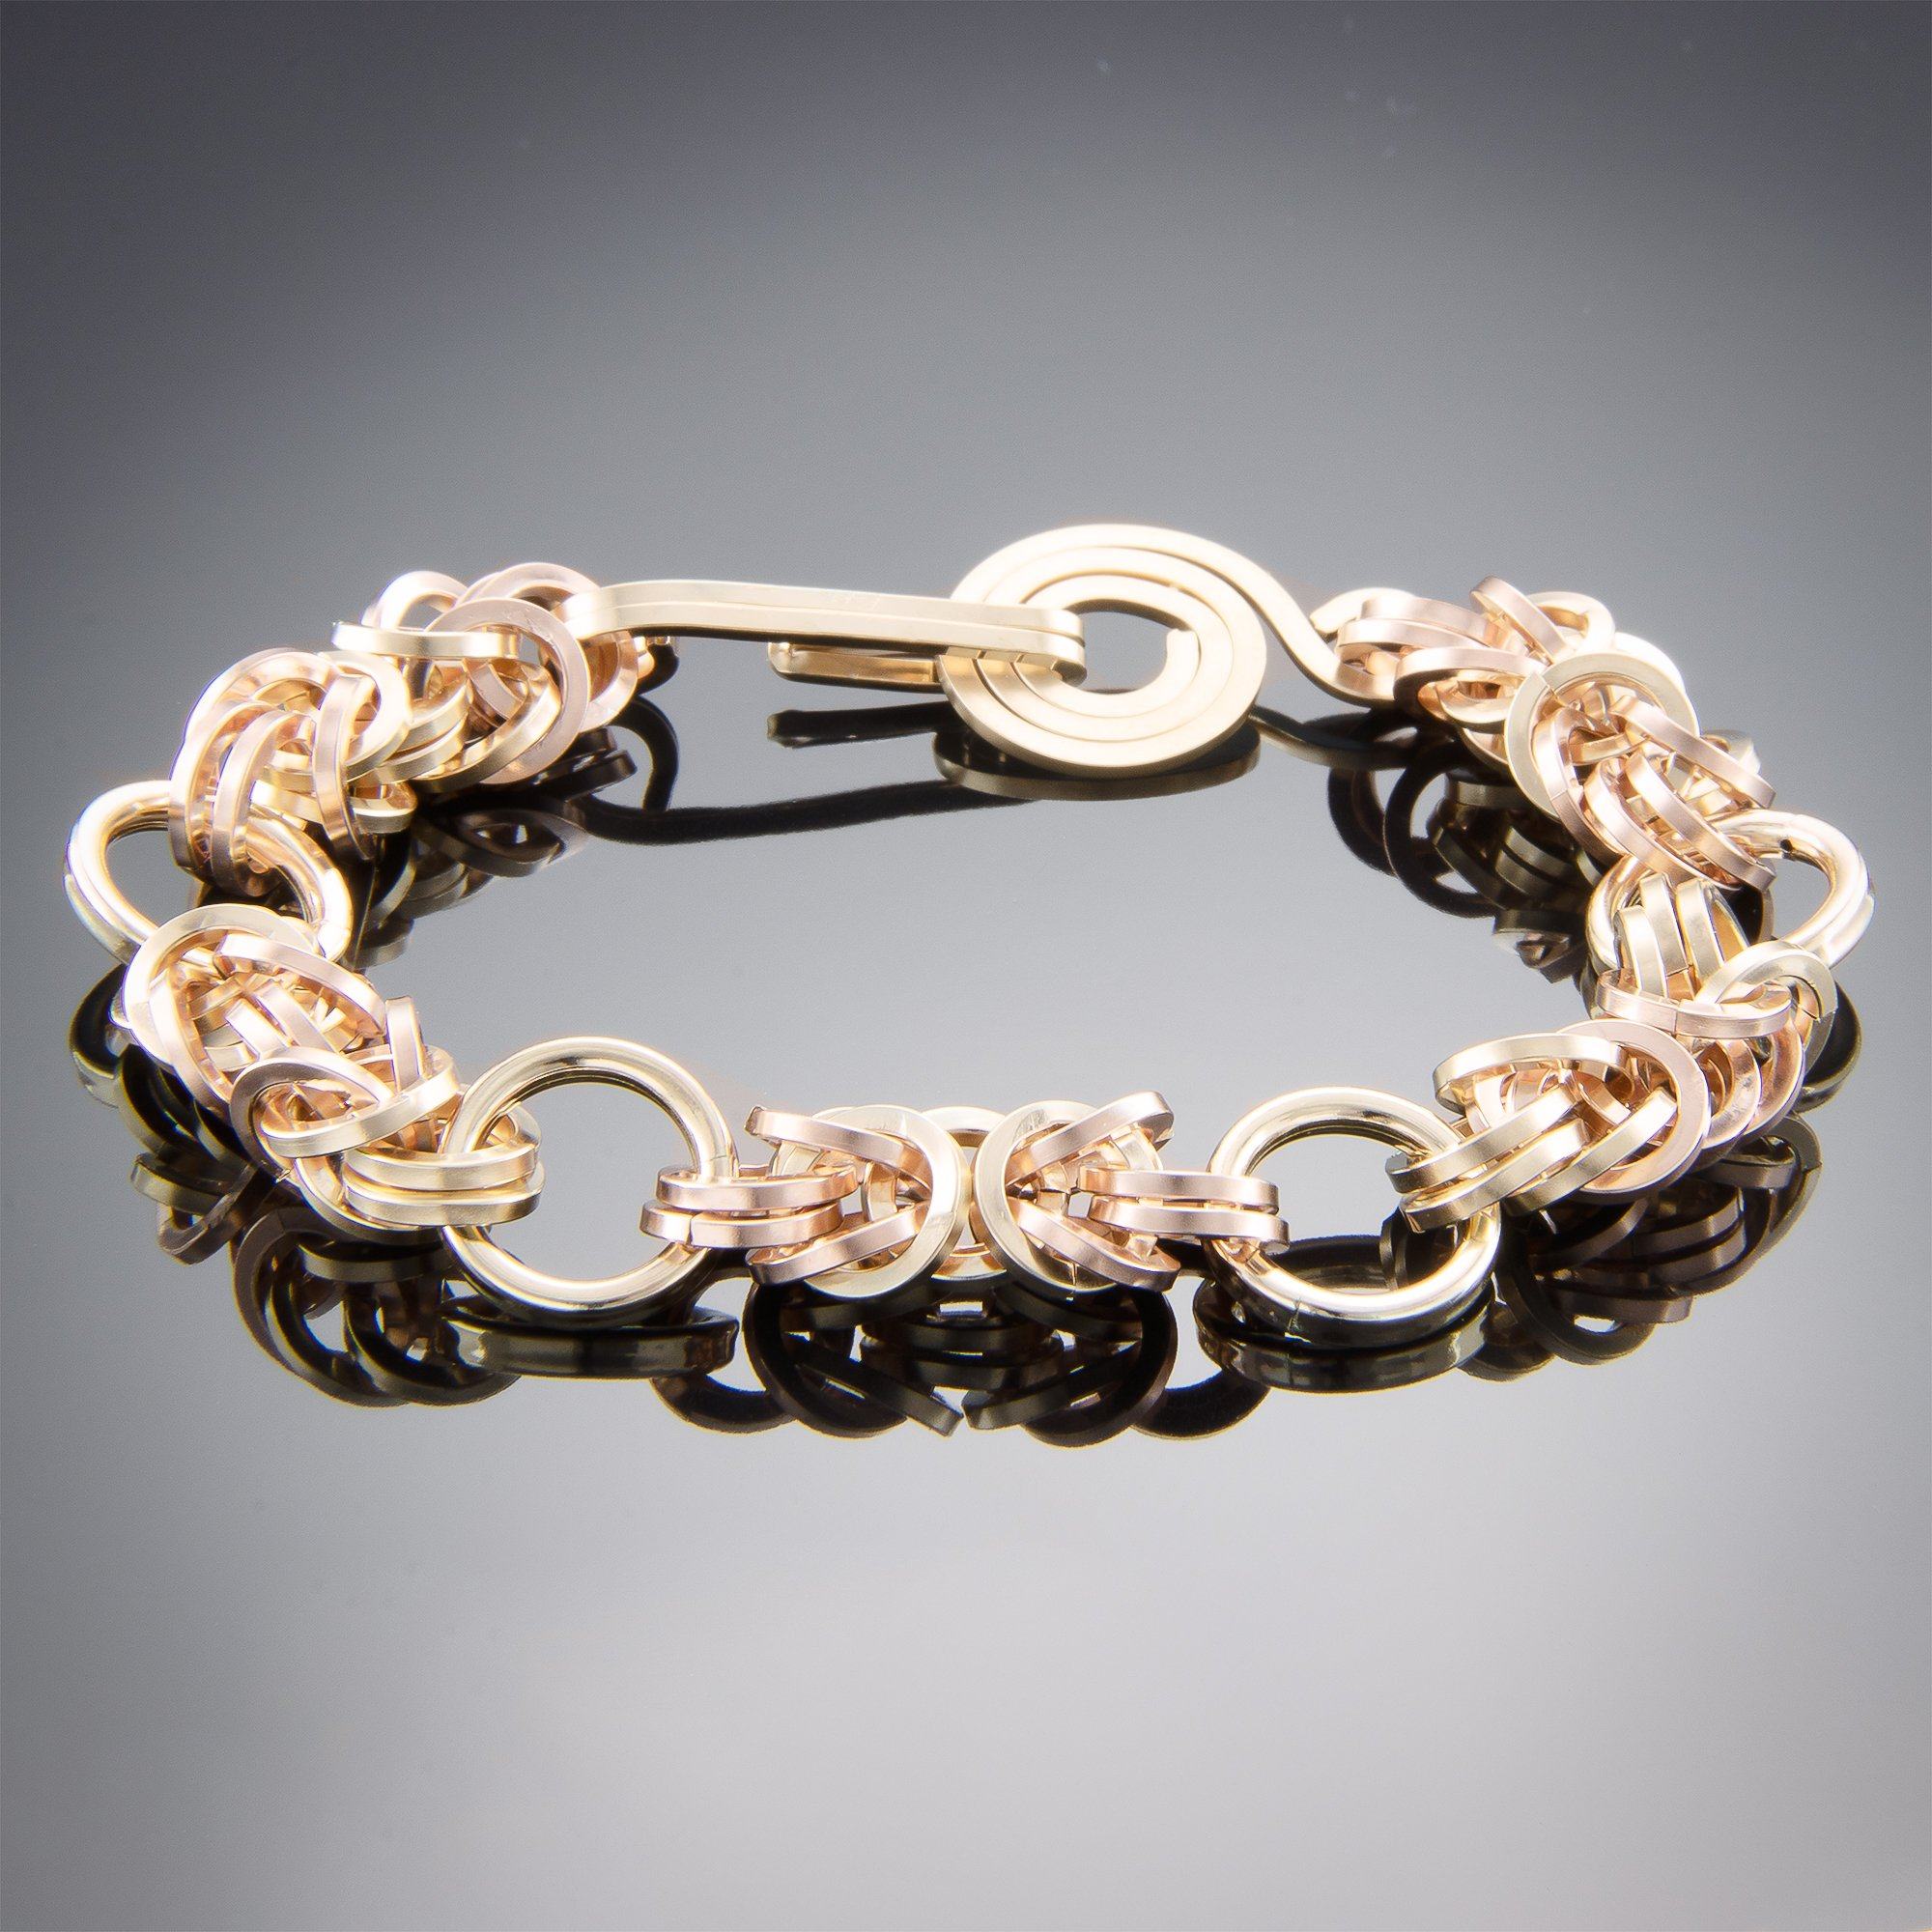 Bold Mixed Metal Byzantine Chunky Statement Bracelet in Both 14K Yellow and Rose Gold Fill